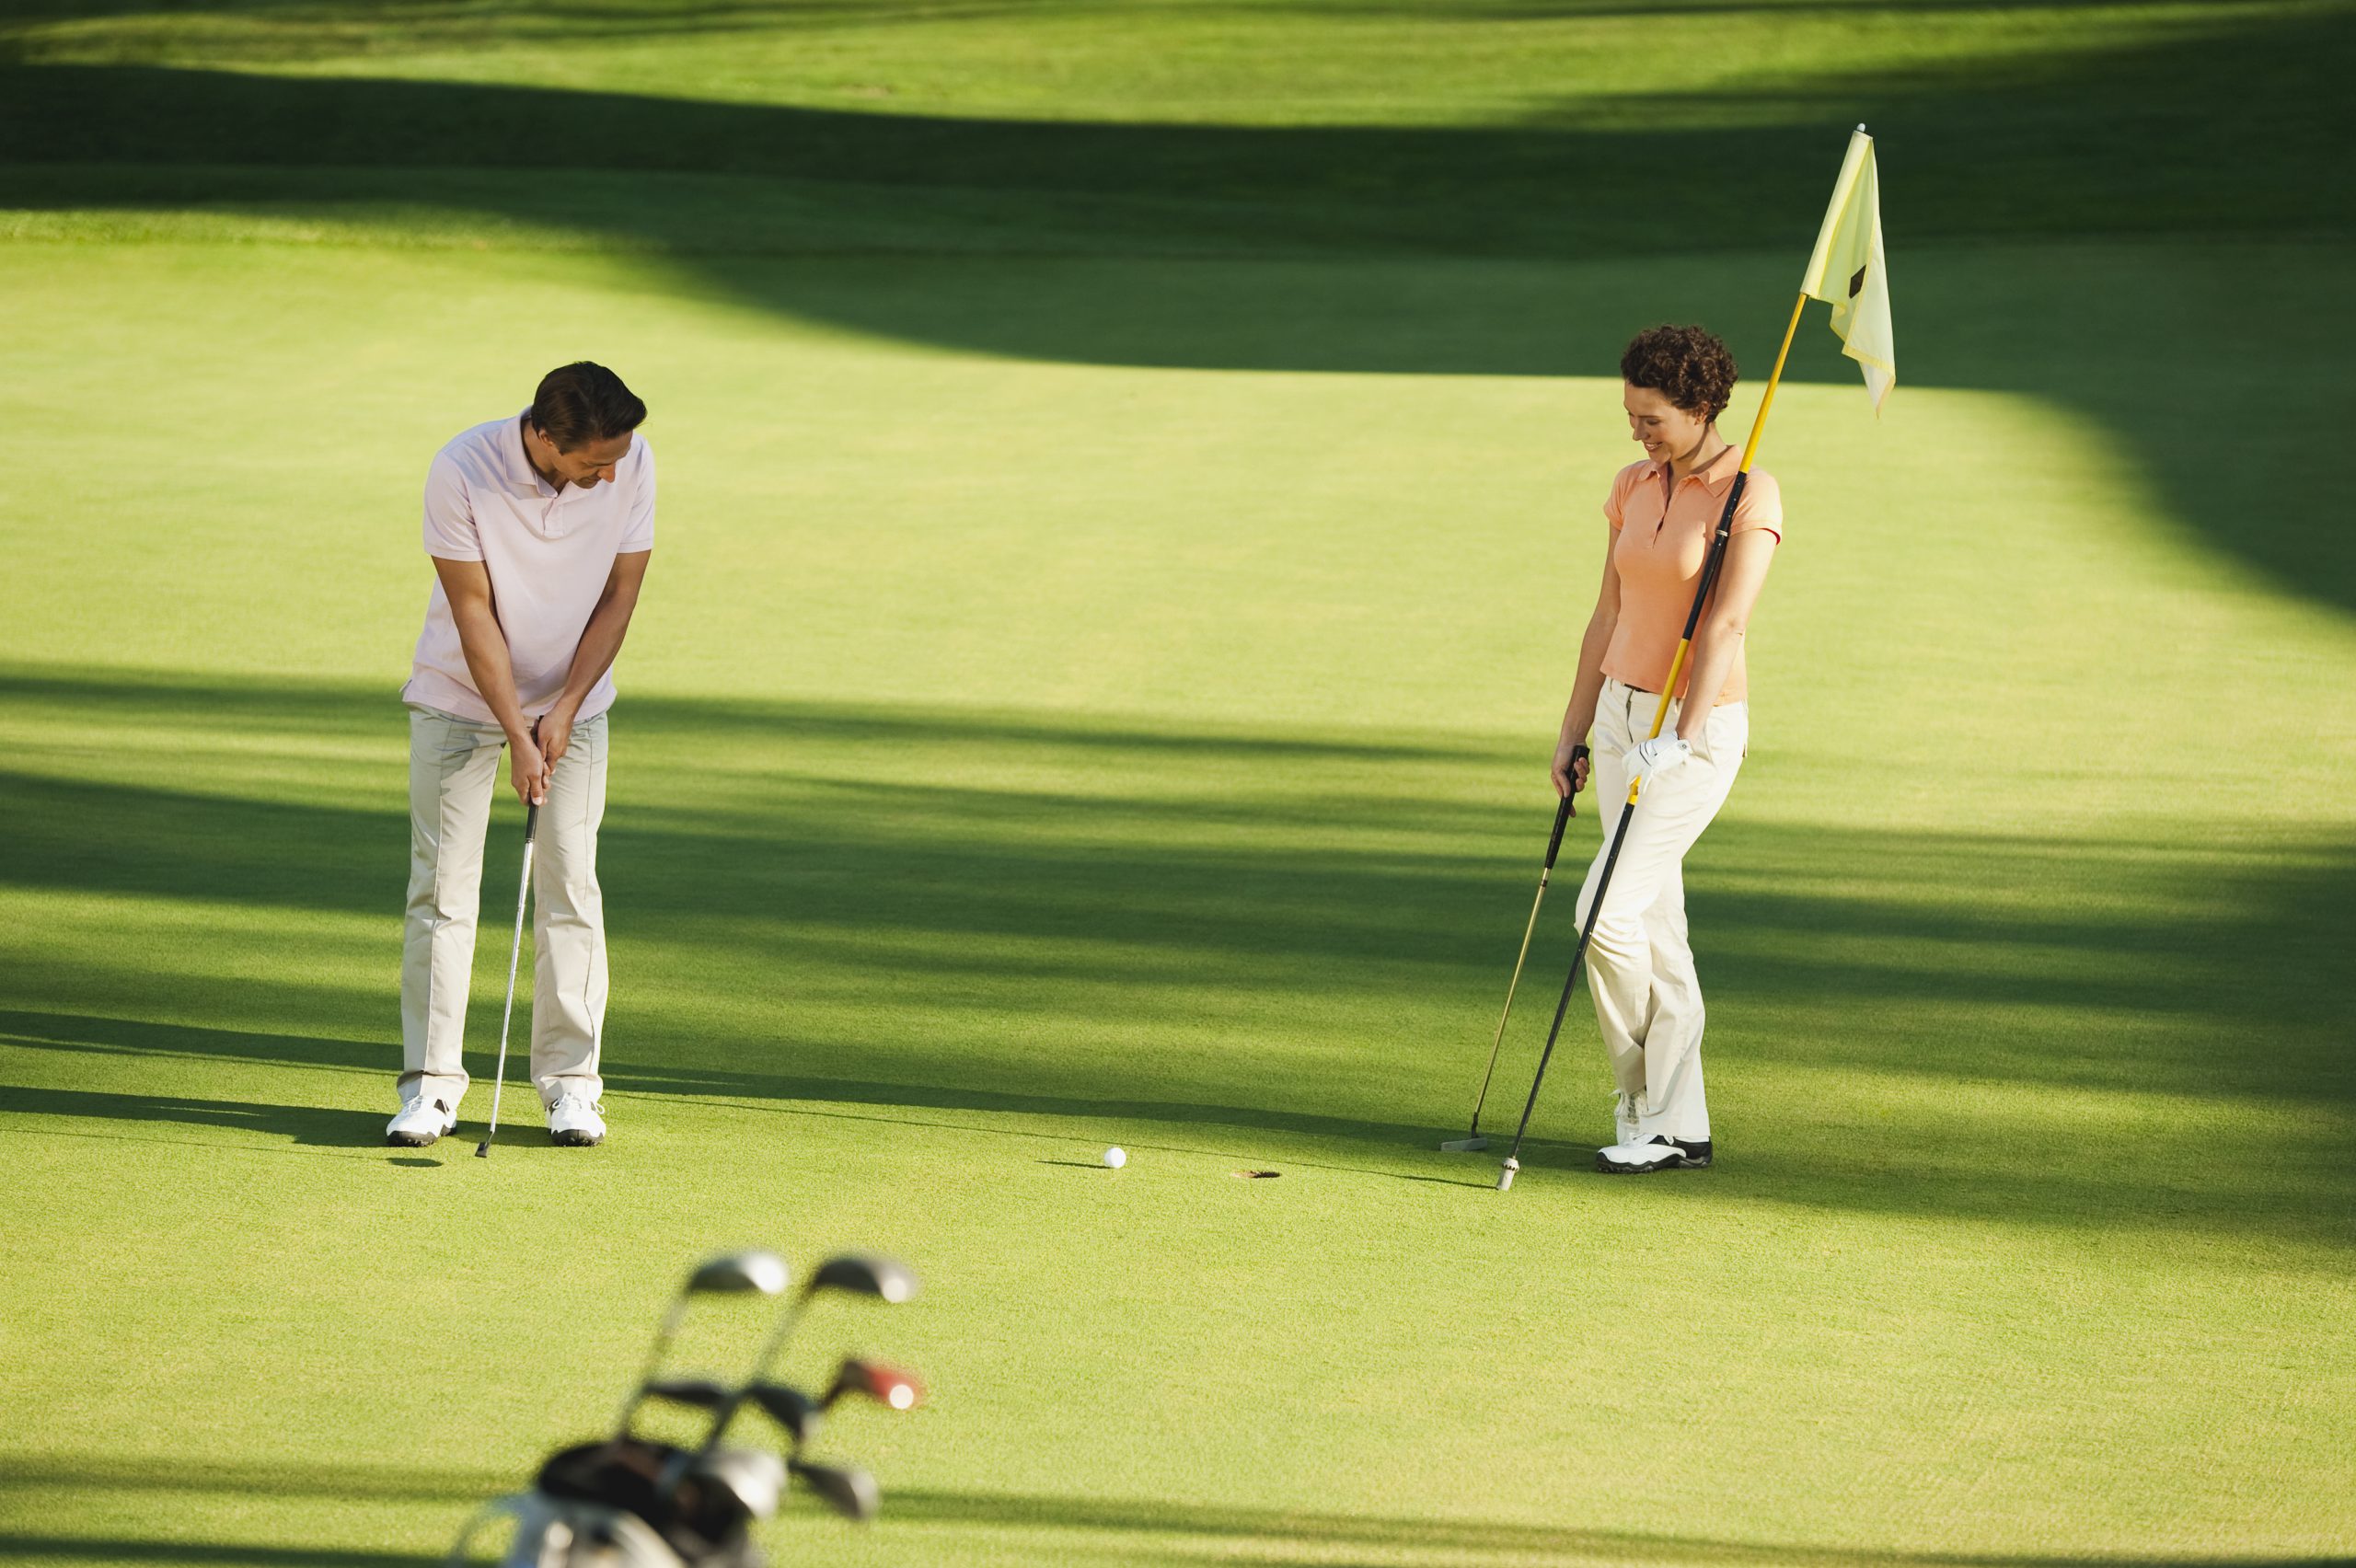 couple playing golf